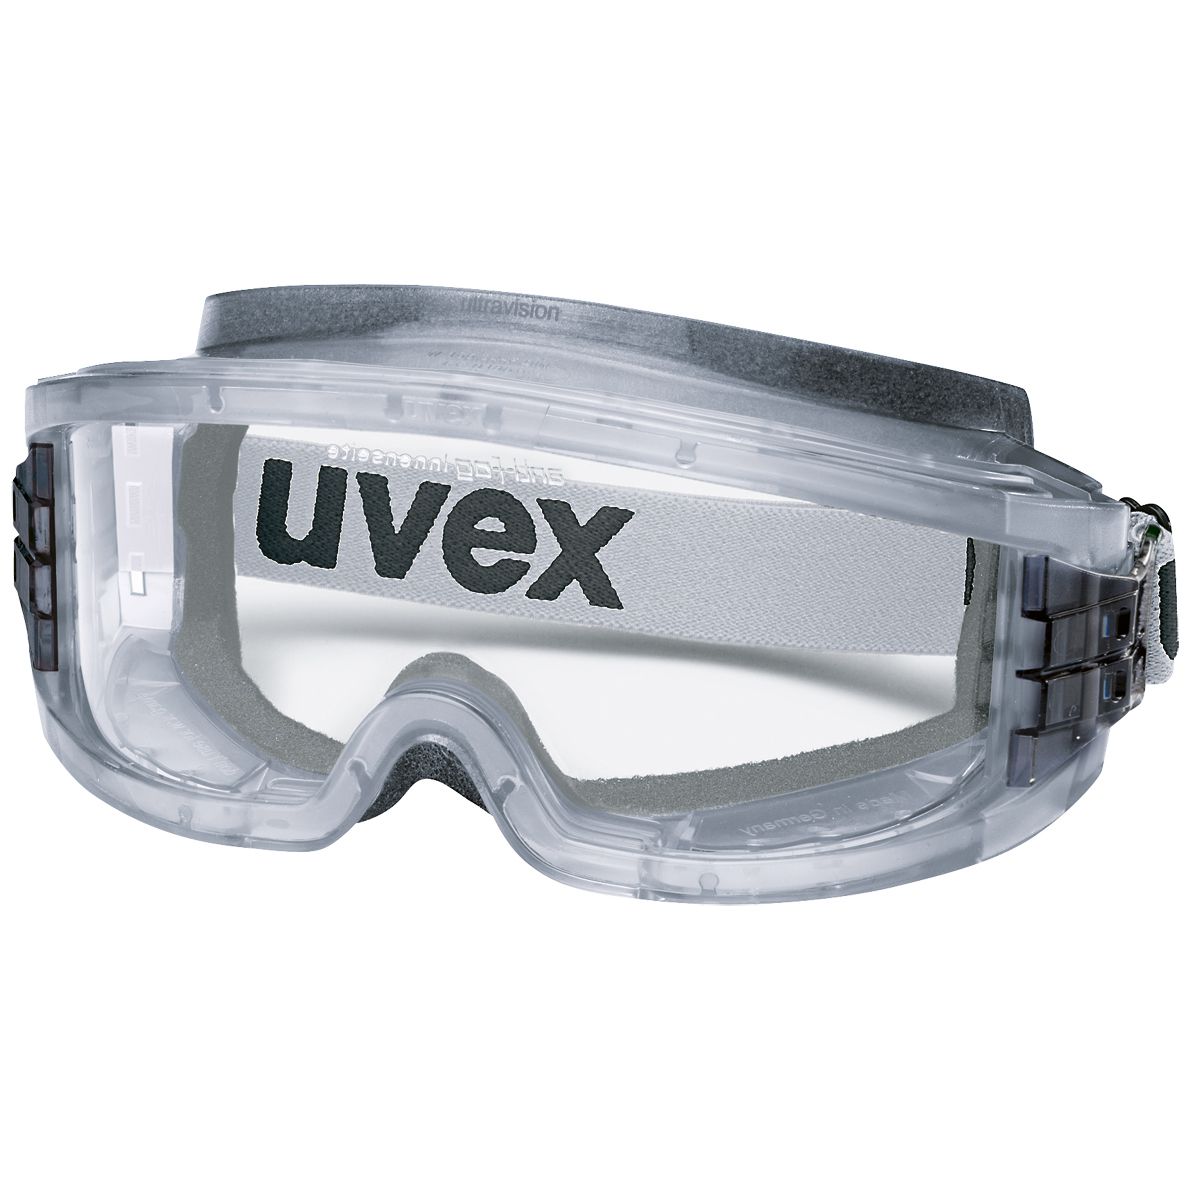 Uvex full vision goggles 9301 ultravision, grey-transparent, lens: colourless, protection: 2-1.2, Oil & Gas